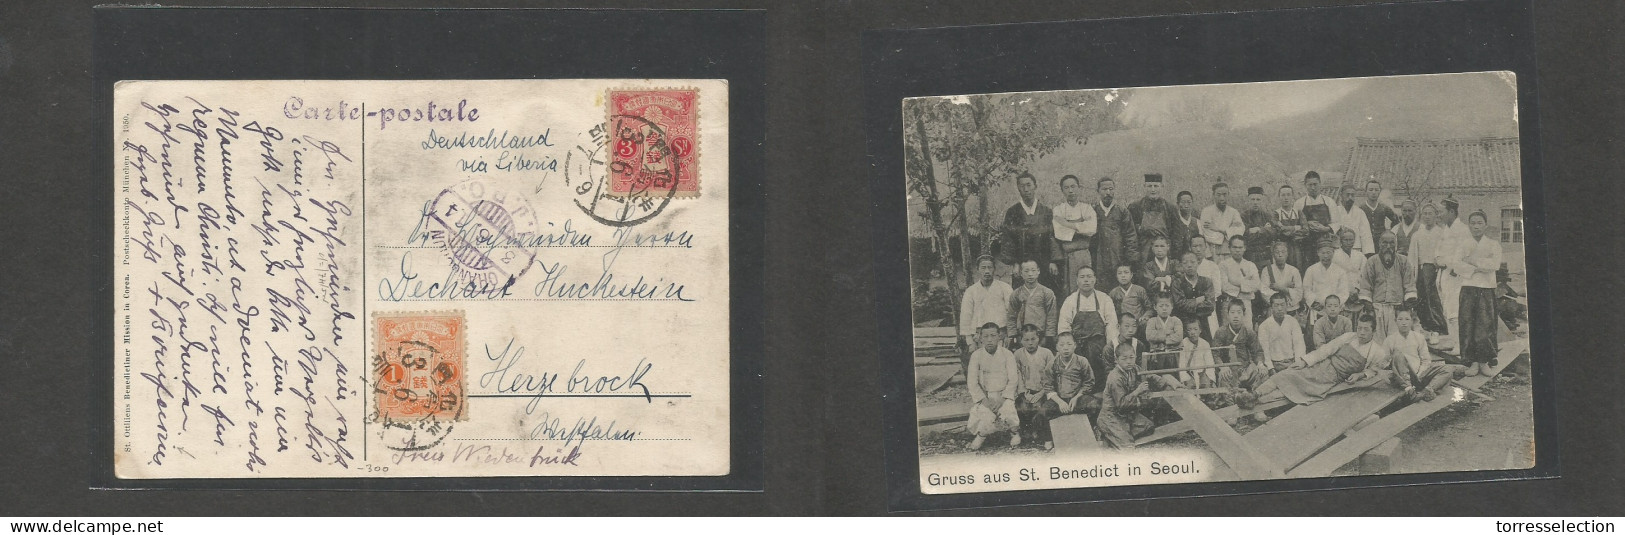 KOREA. 1914 (1 June) WWI. Missionary Mail. St. Benedict, Seoul (as Per Text). Japan Fkd Photo Ppc, Tied Cds. Routed Via  - Corea (...-1945)